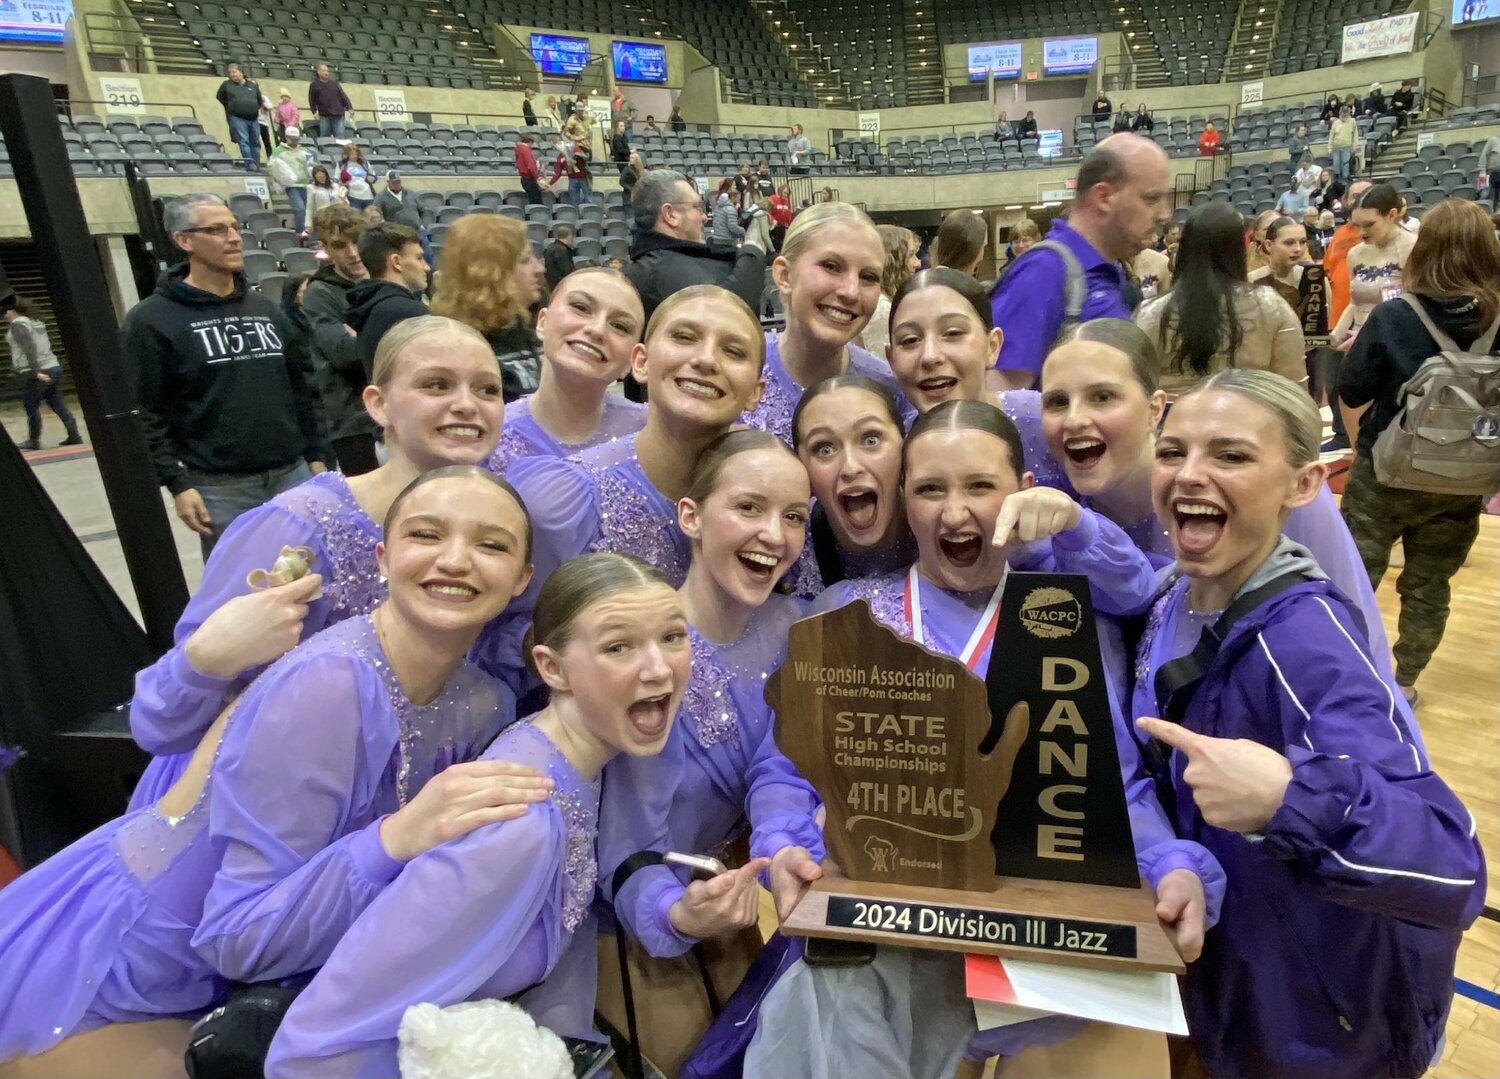 The Ellsworth Panthers won fourth place in jazz at the state competition in La Crosse on Saturday, Feb. 3.